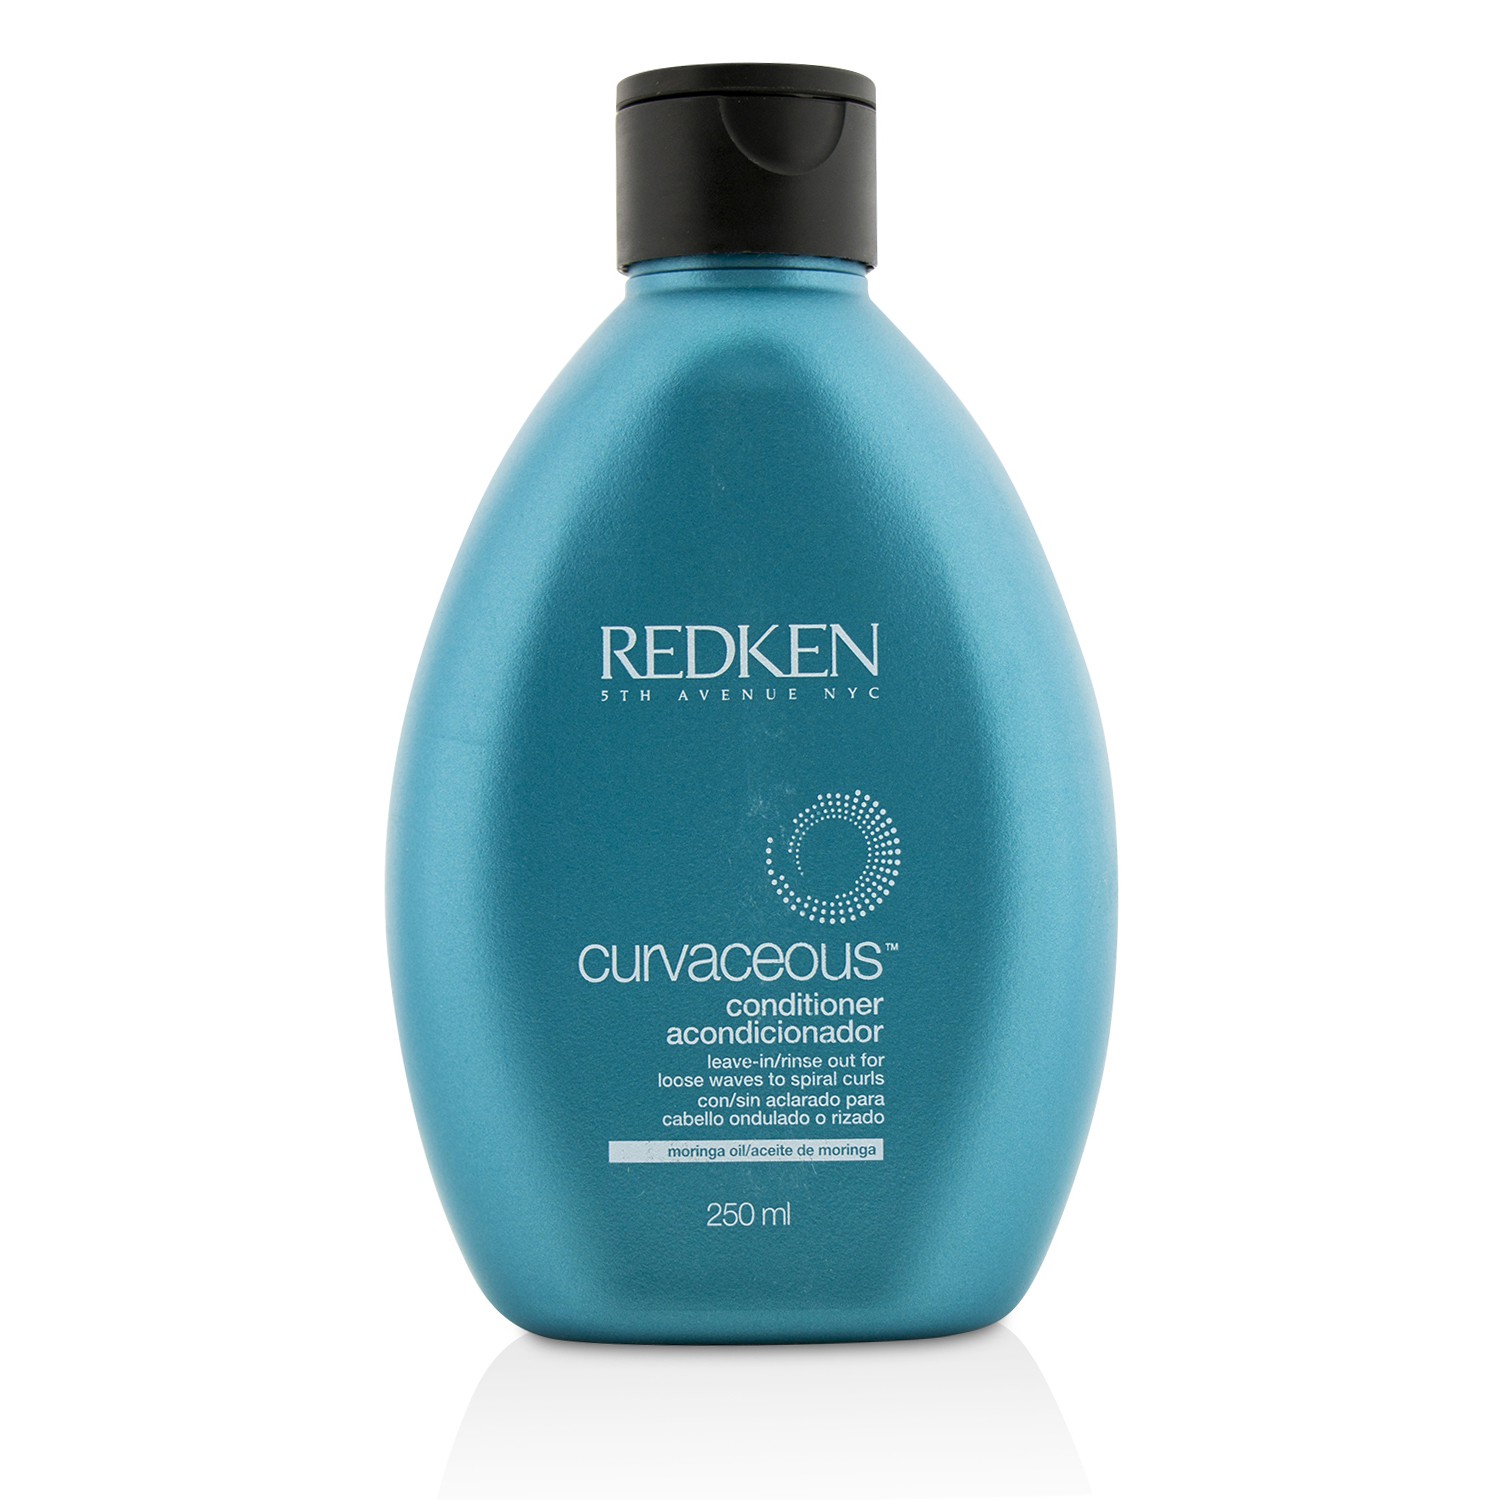 Curvaceous Conditioner - Leave-In/Rinse-Out (For Loose Waves to Spiral Curls) Redken Image